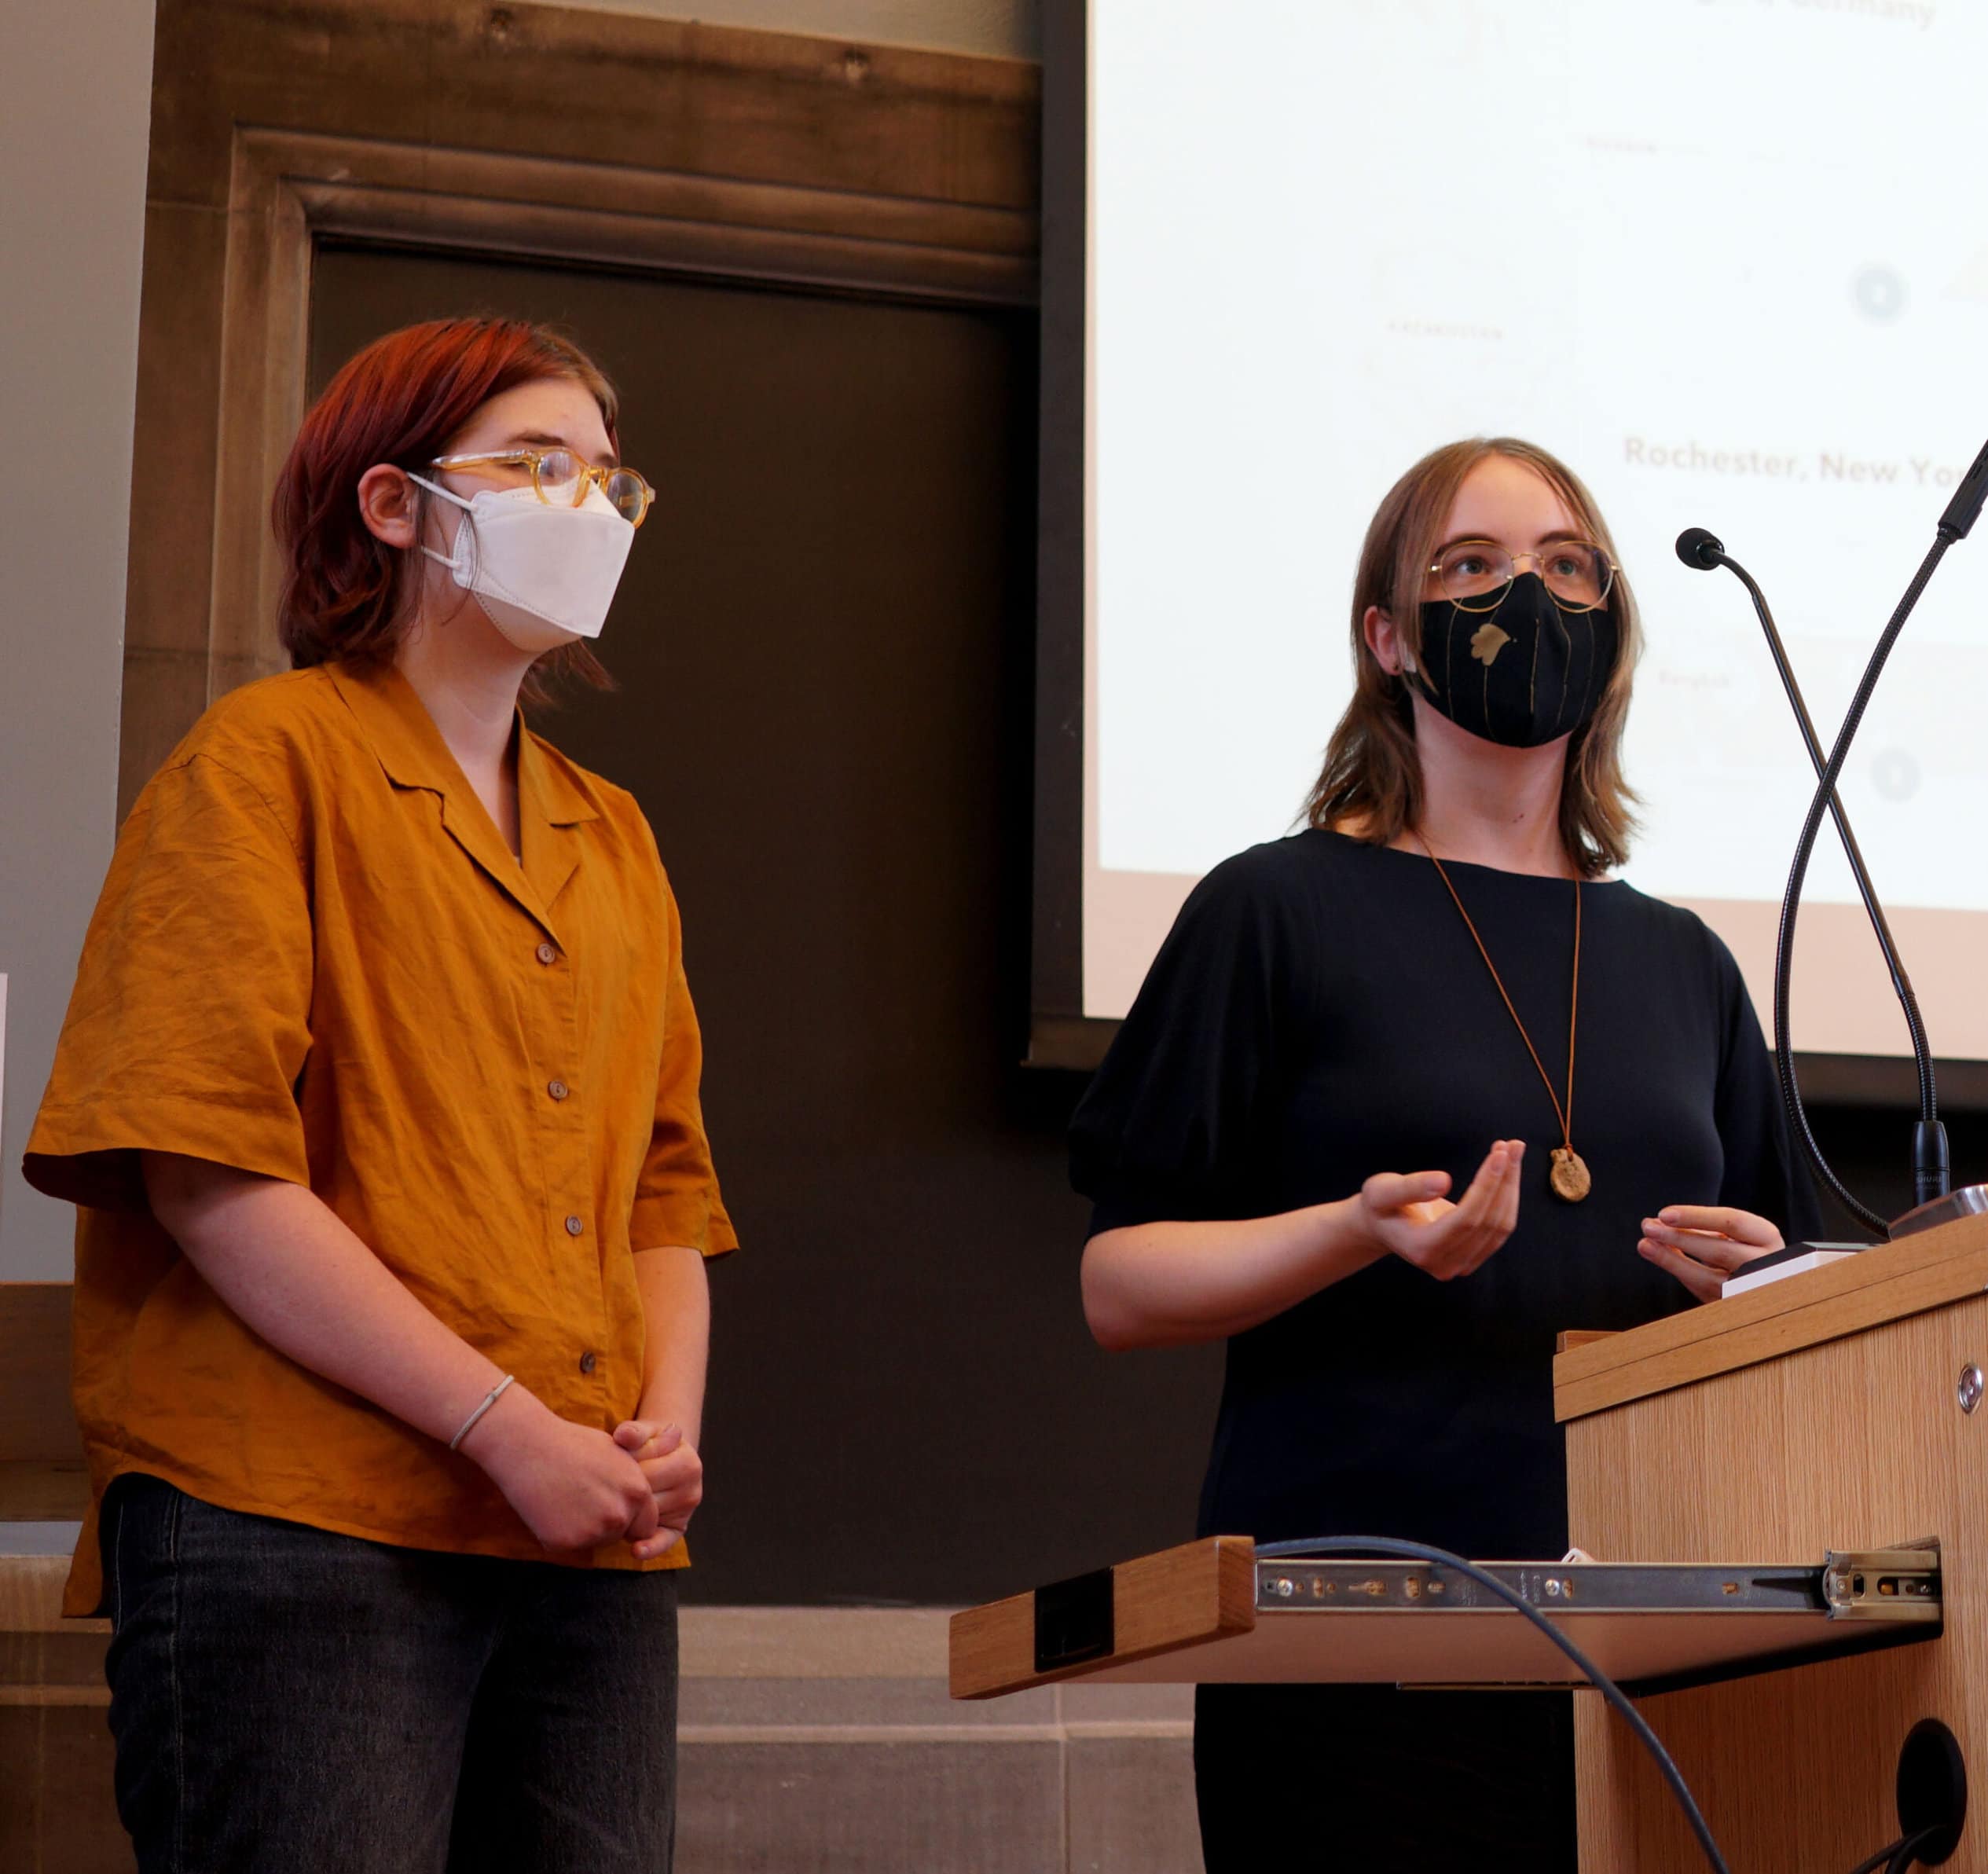 Izzy Friesen and Mies Kerr, wearing face masks, stand at a podium and give a presentation.